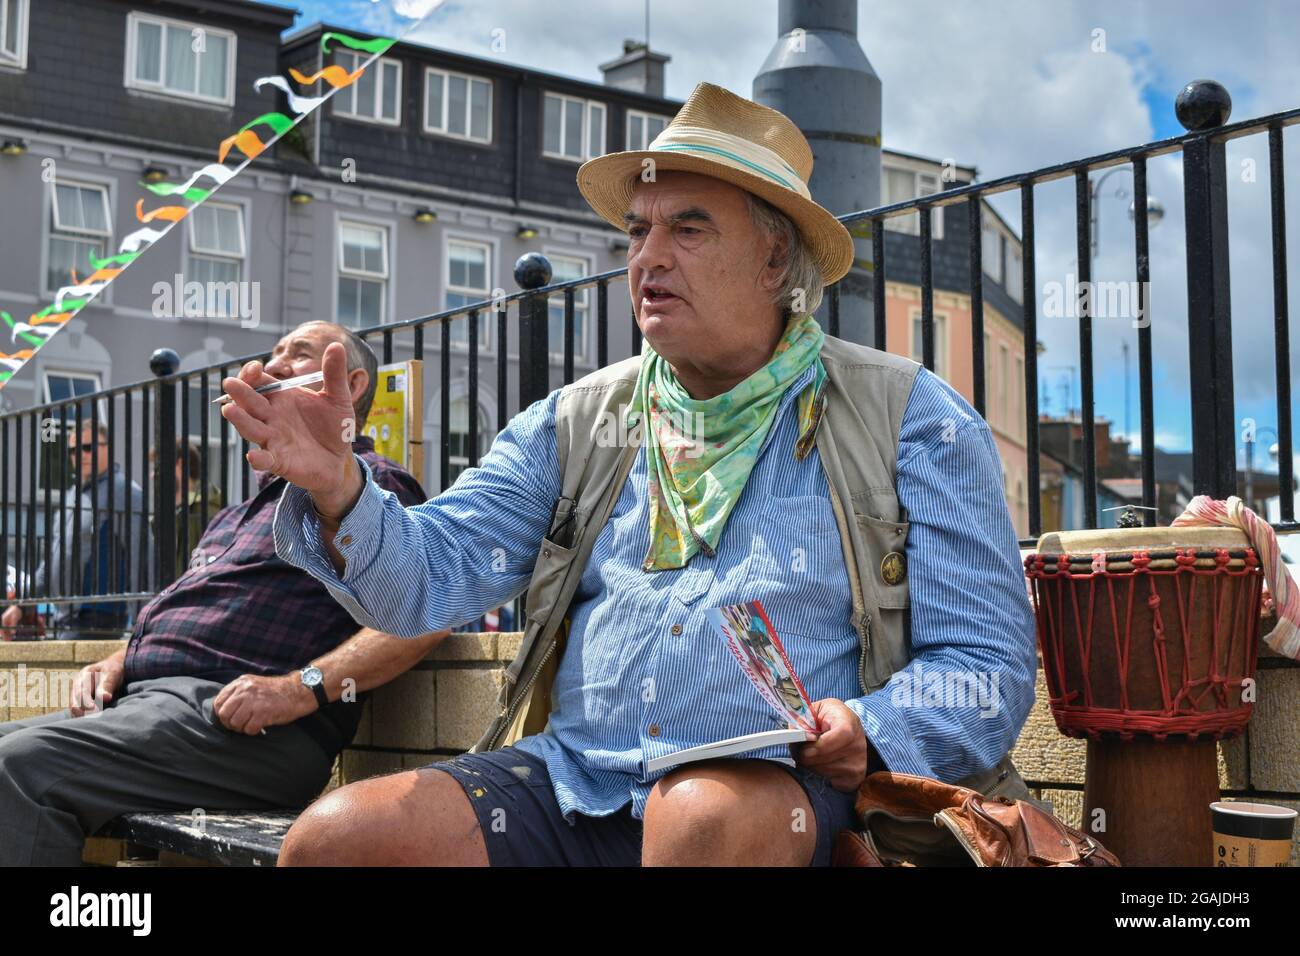 Bantry, West Cork, Ireland. 30th July 2021. Ian Bailey’s appeal against his conviction for drug driving and the possession of drugs has been adjourned until October. Pictured below Ian Bailey at Bantry market selling books and signing them. Credit: Karlis Dzjamko/Alamy Live News Stock Photo